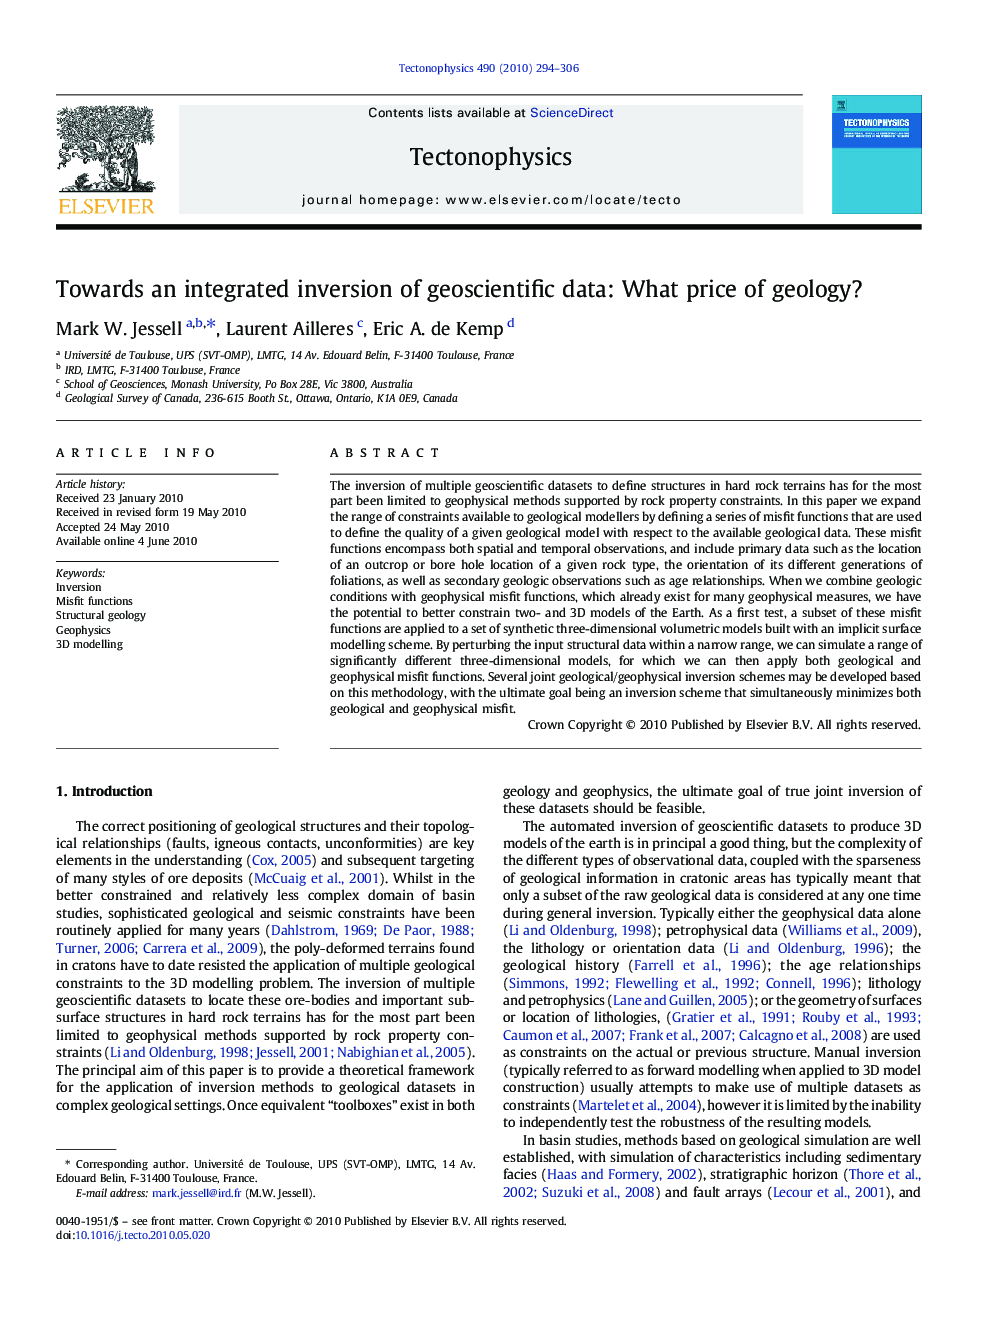 Towards an integrated inversion of geoscientific data: What price of geology?